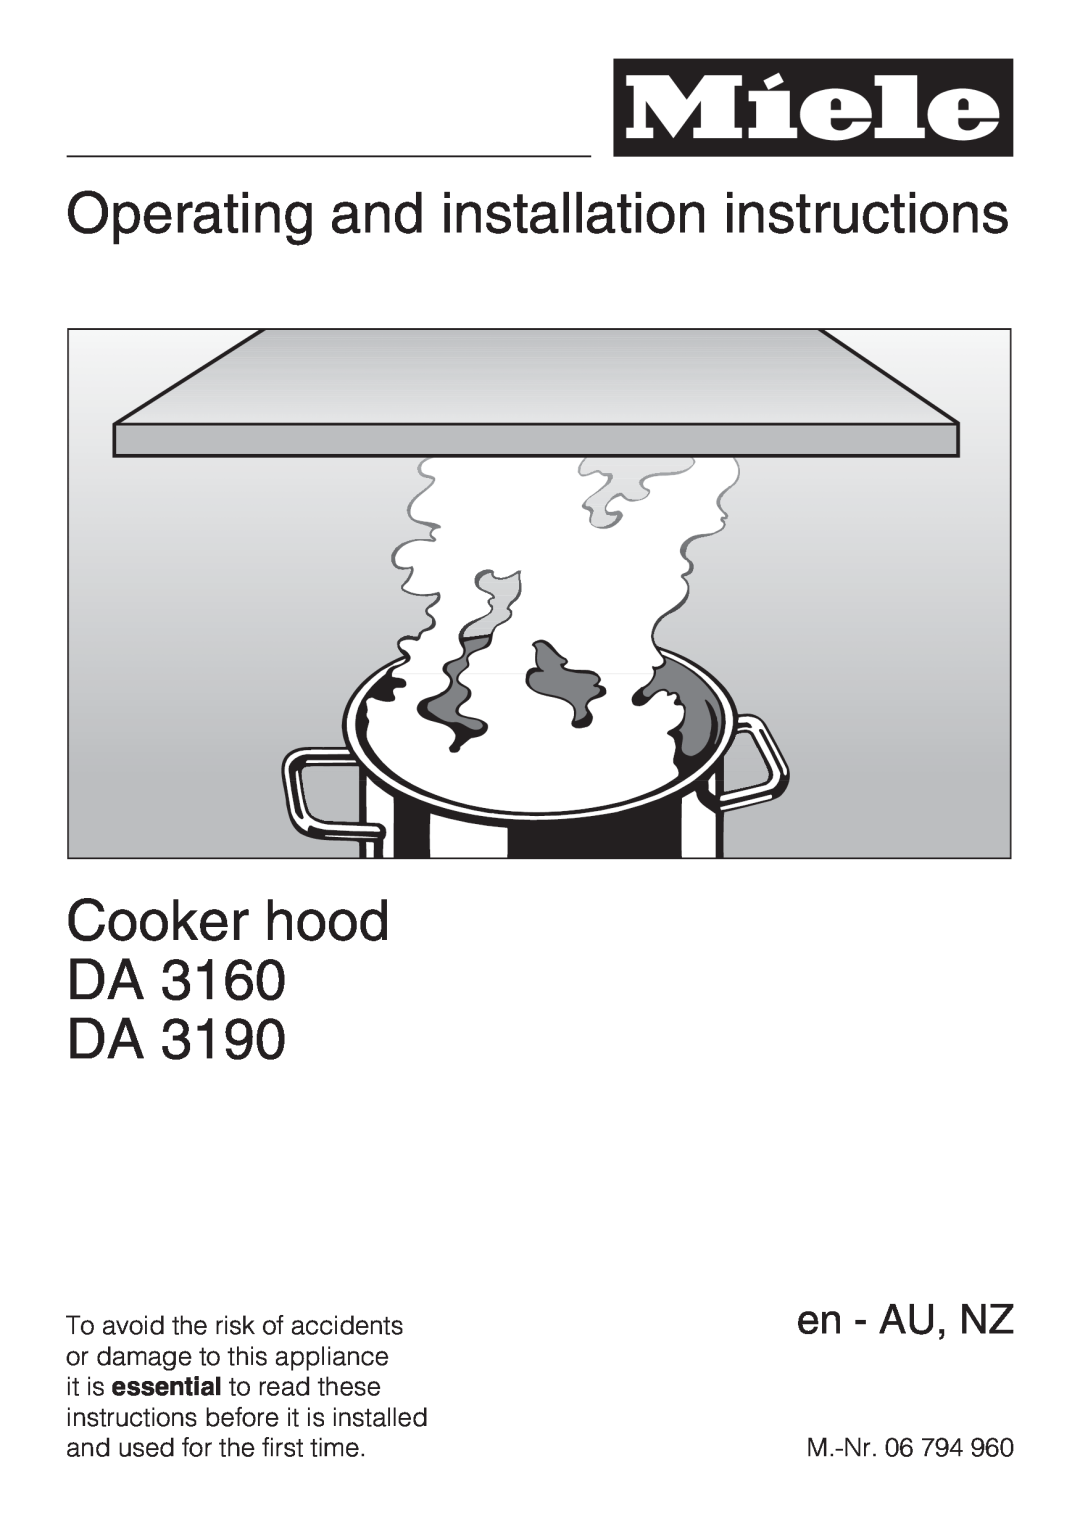 Miele dimensions Product and Cut-outDimensions, Page 1 of, DA 3190 Built-InHoods, Location Codes 